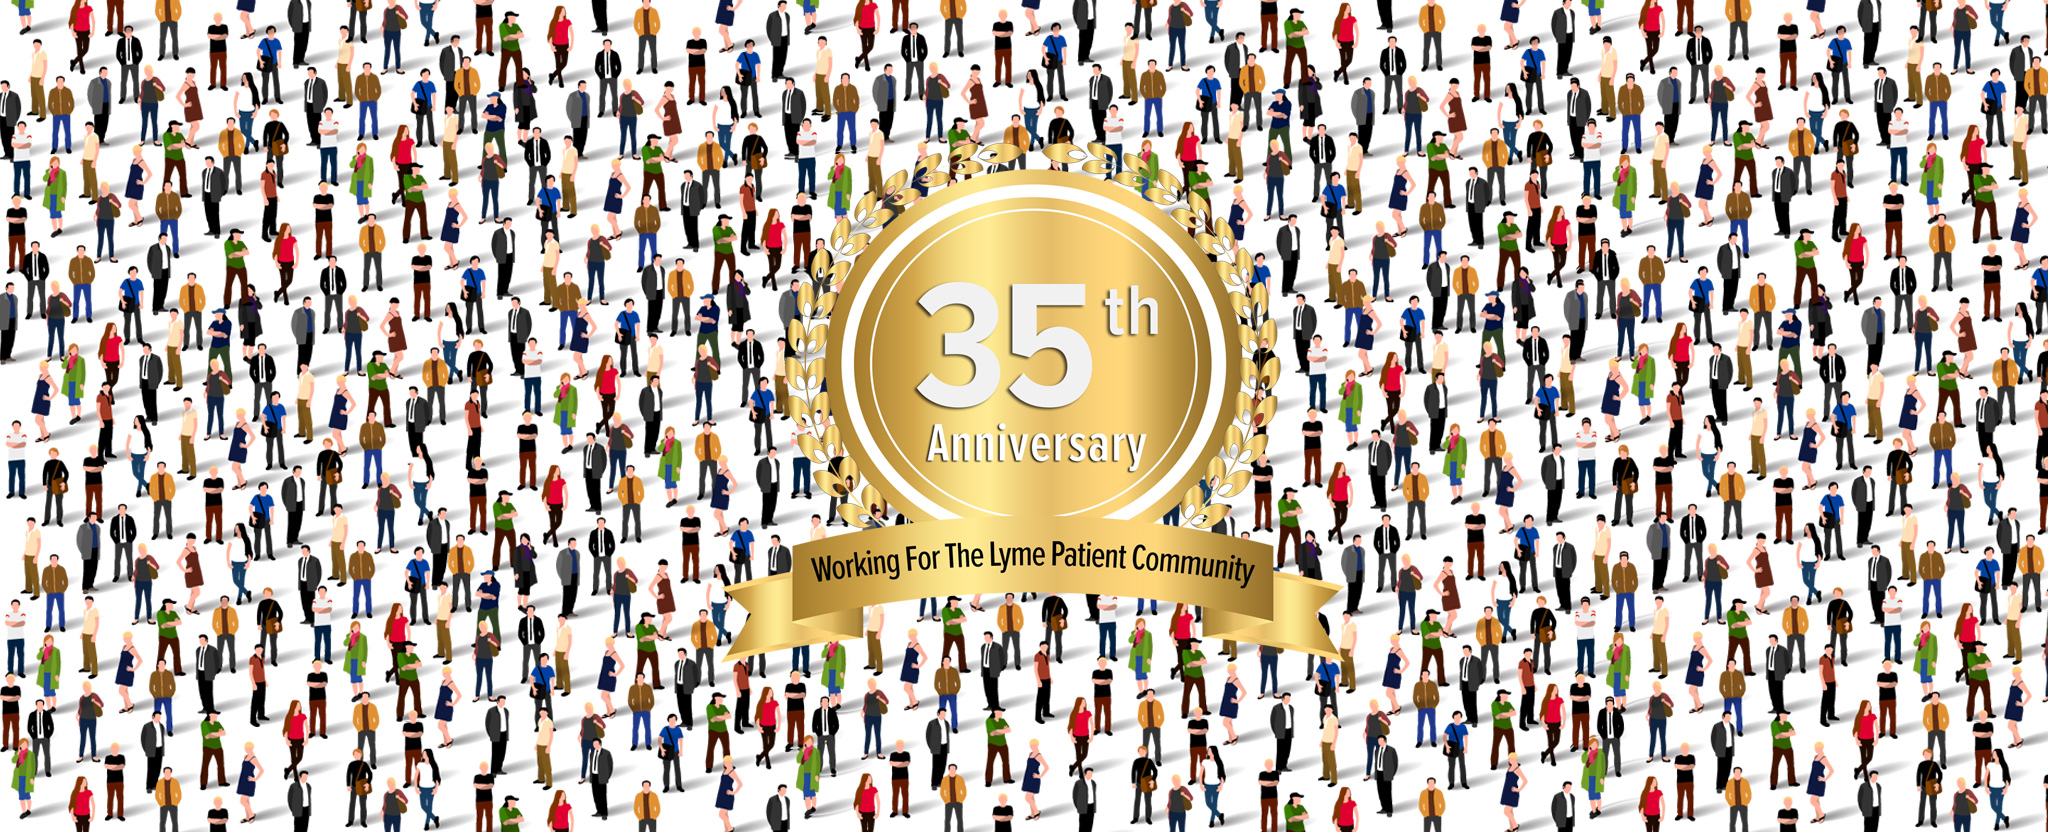 LymeDisease.org — 35 years of advocating for you